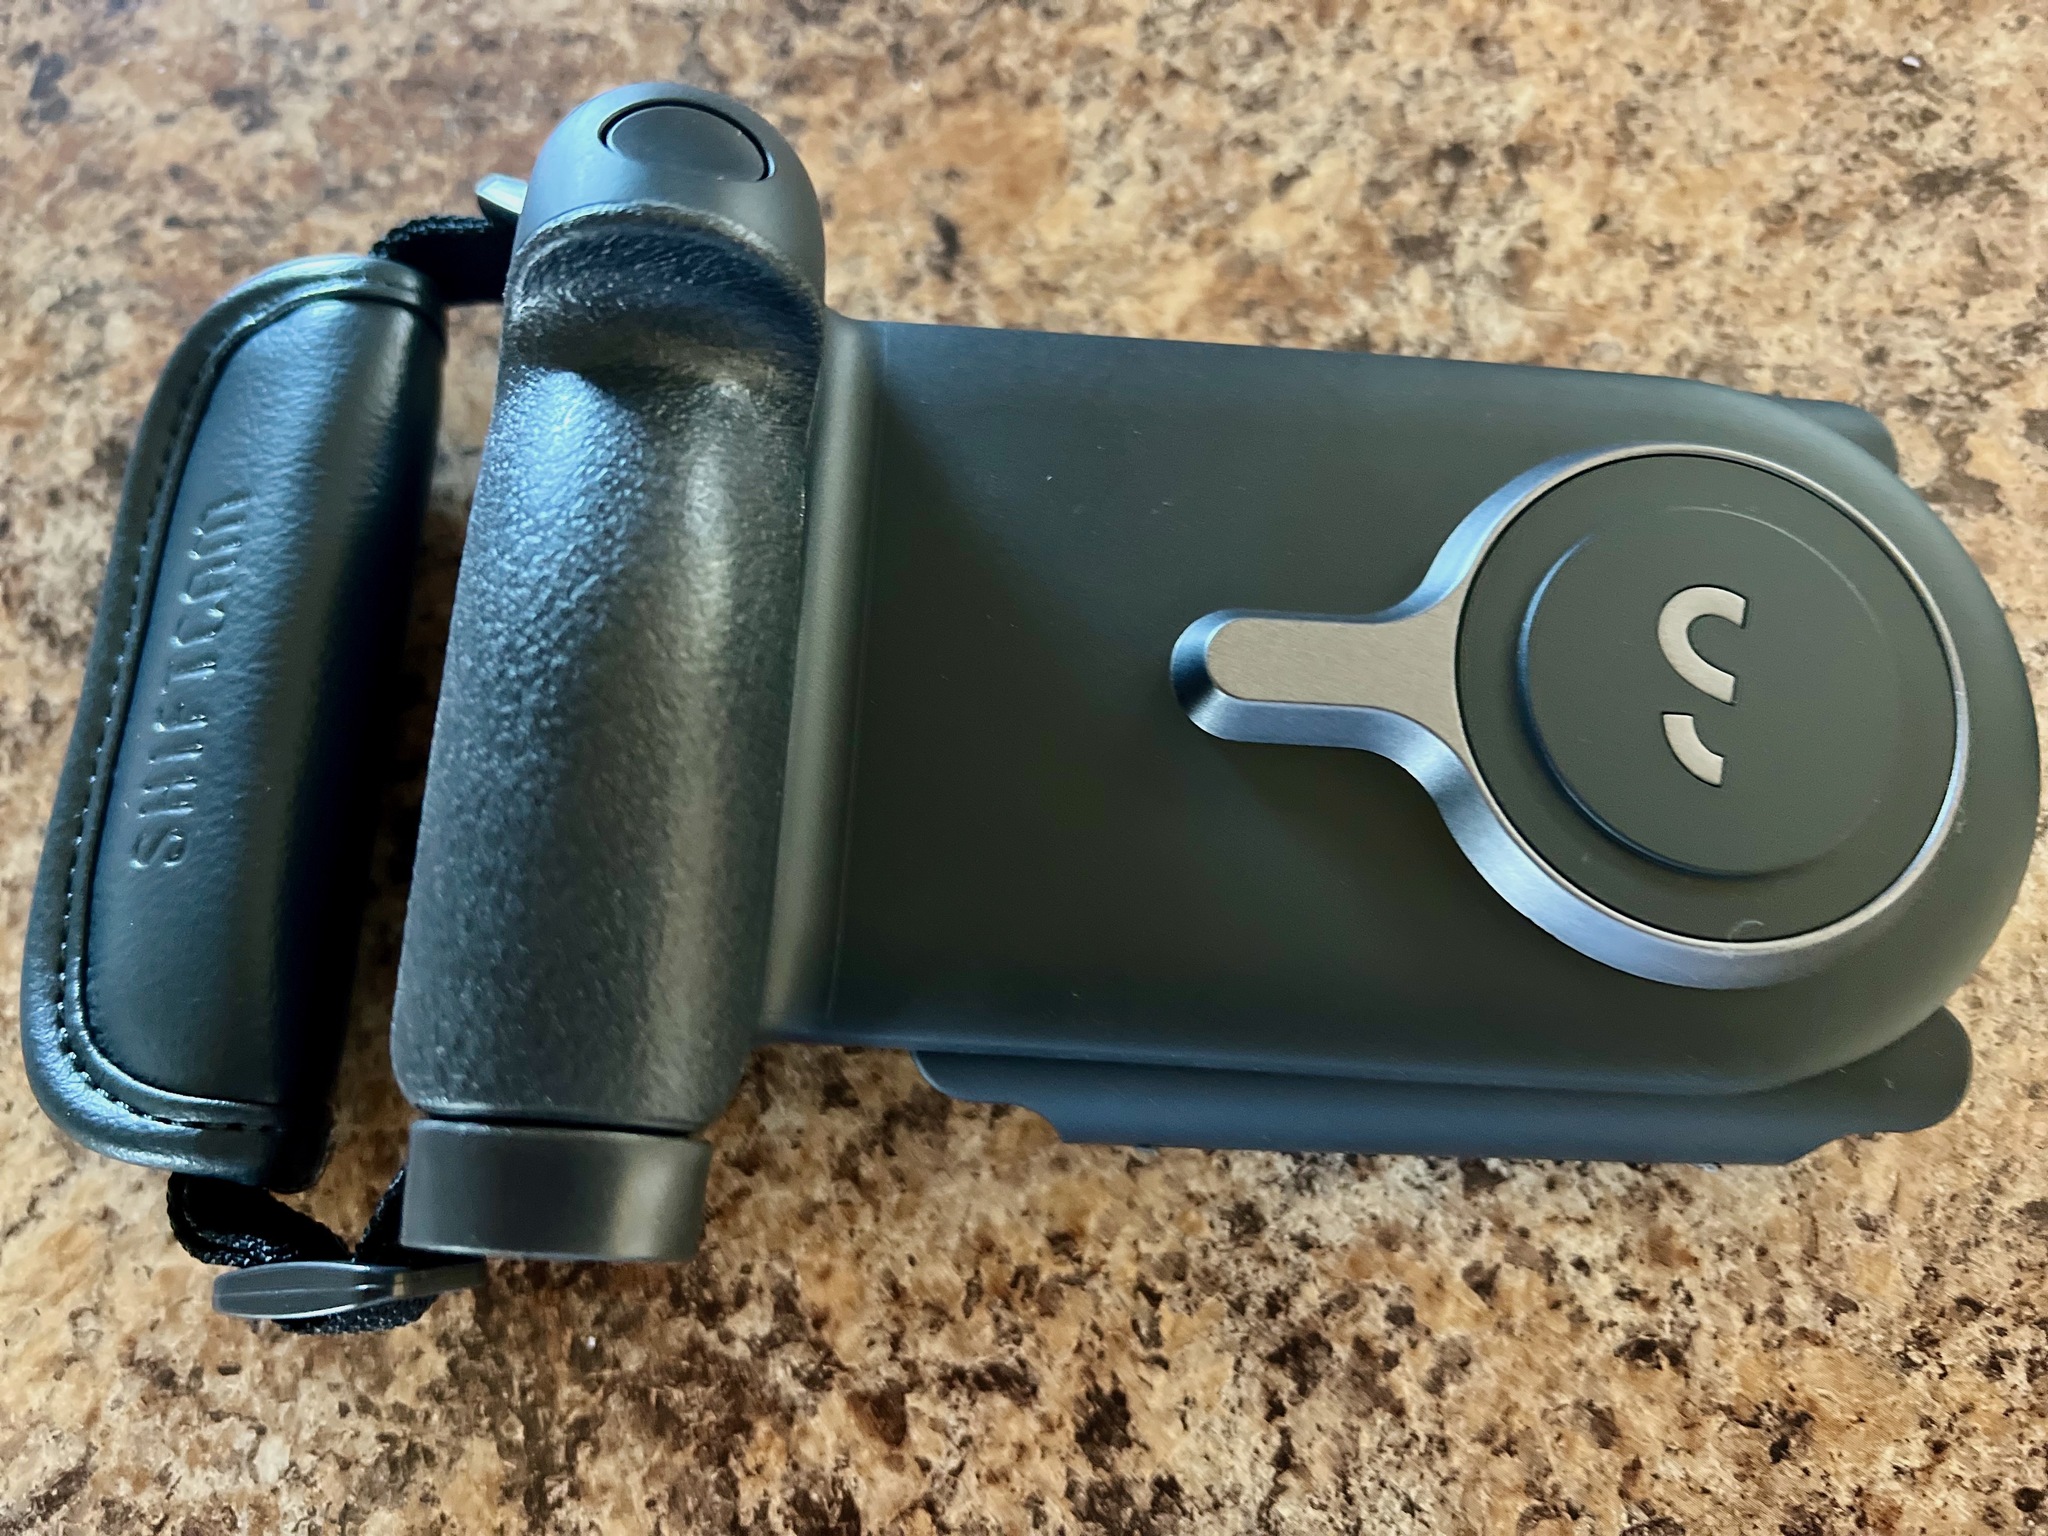 ShiftCam ProGrip review: Add grip, security, and more battery when 